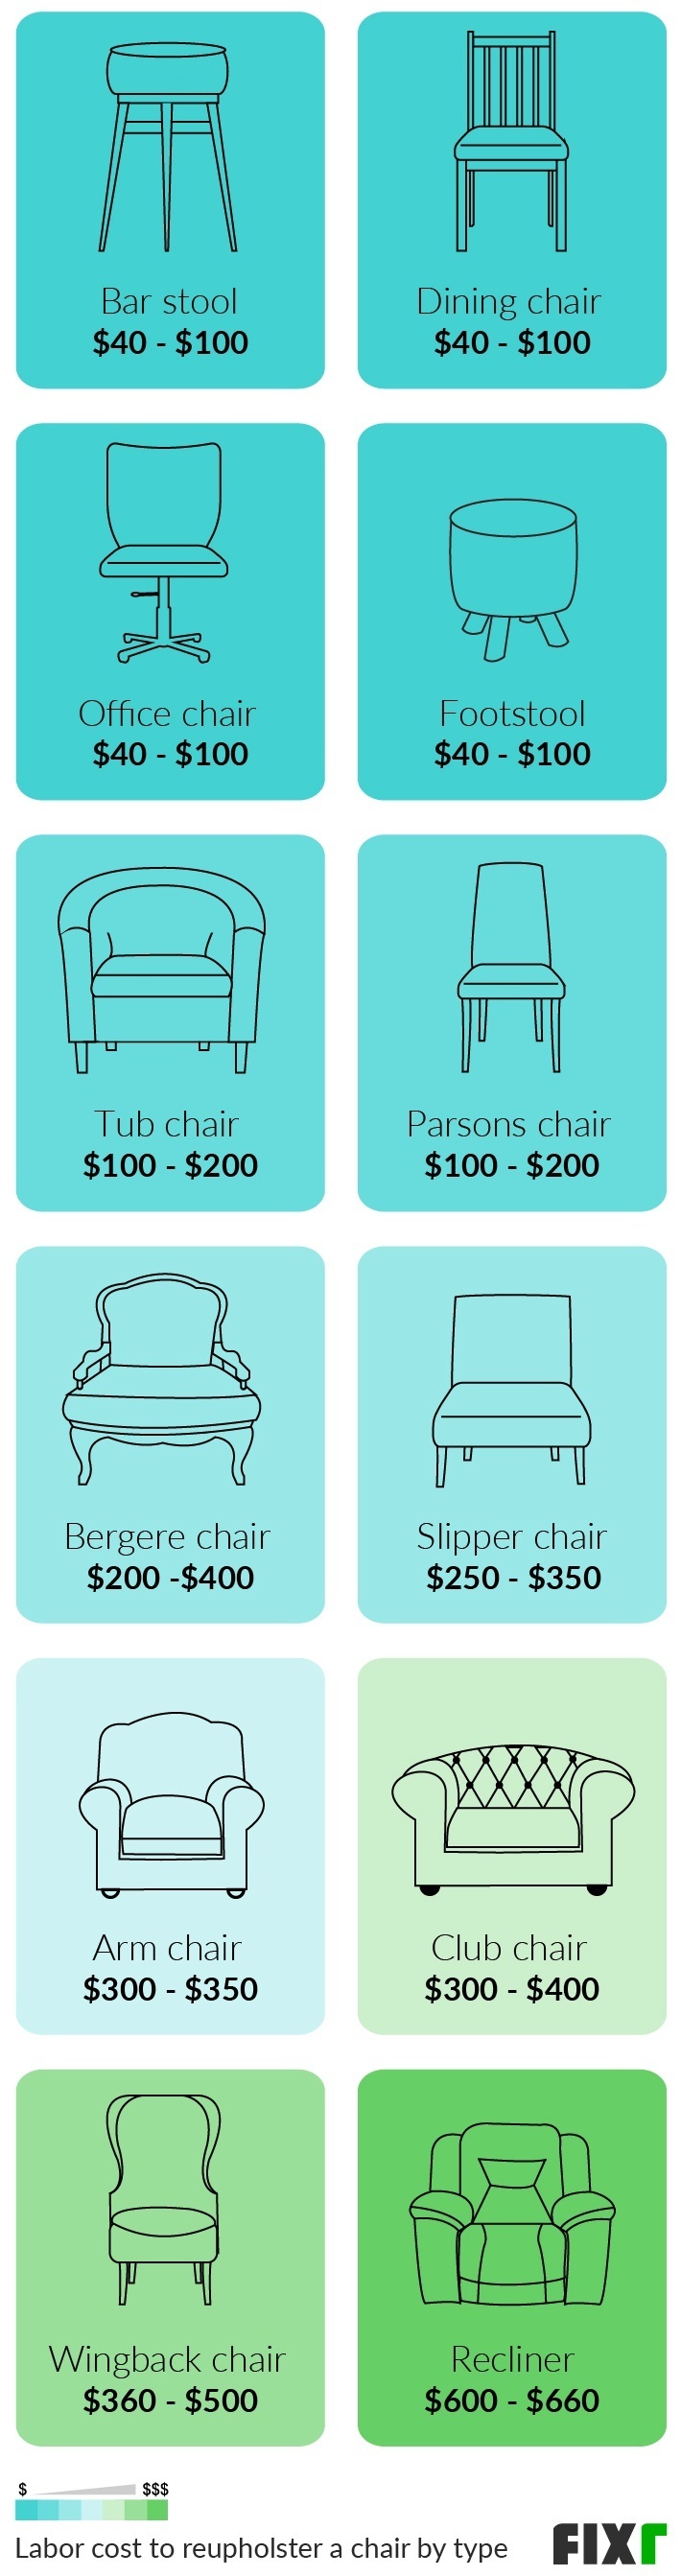 2021 Cost To Reupholster A Chair, How Much Does It Cost To Recover A Recliner Chair